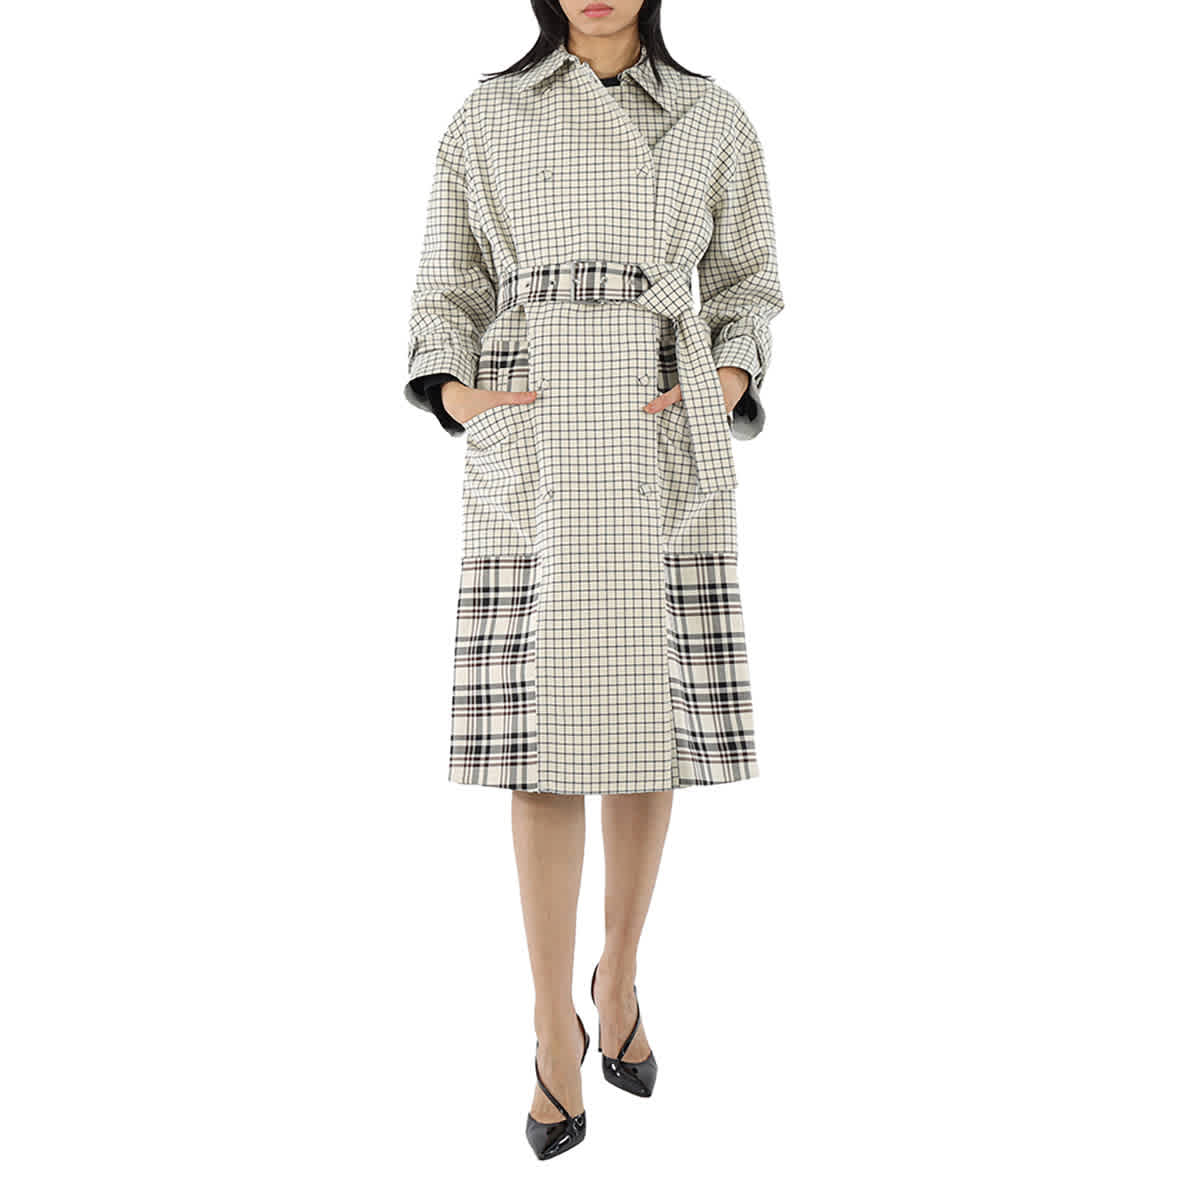 Proenza Schouler Ladies Windowpane Plaid Belted Trench Coat, Brand Size 6 - image 1 of 1